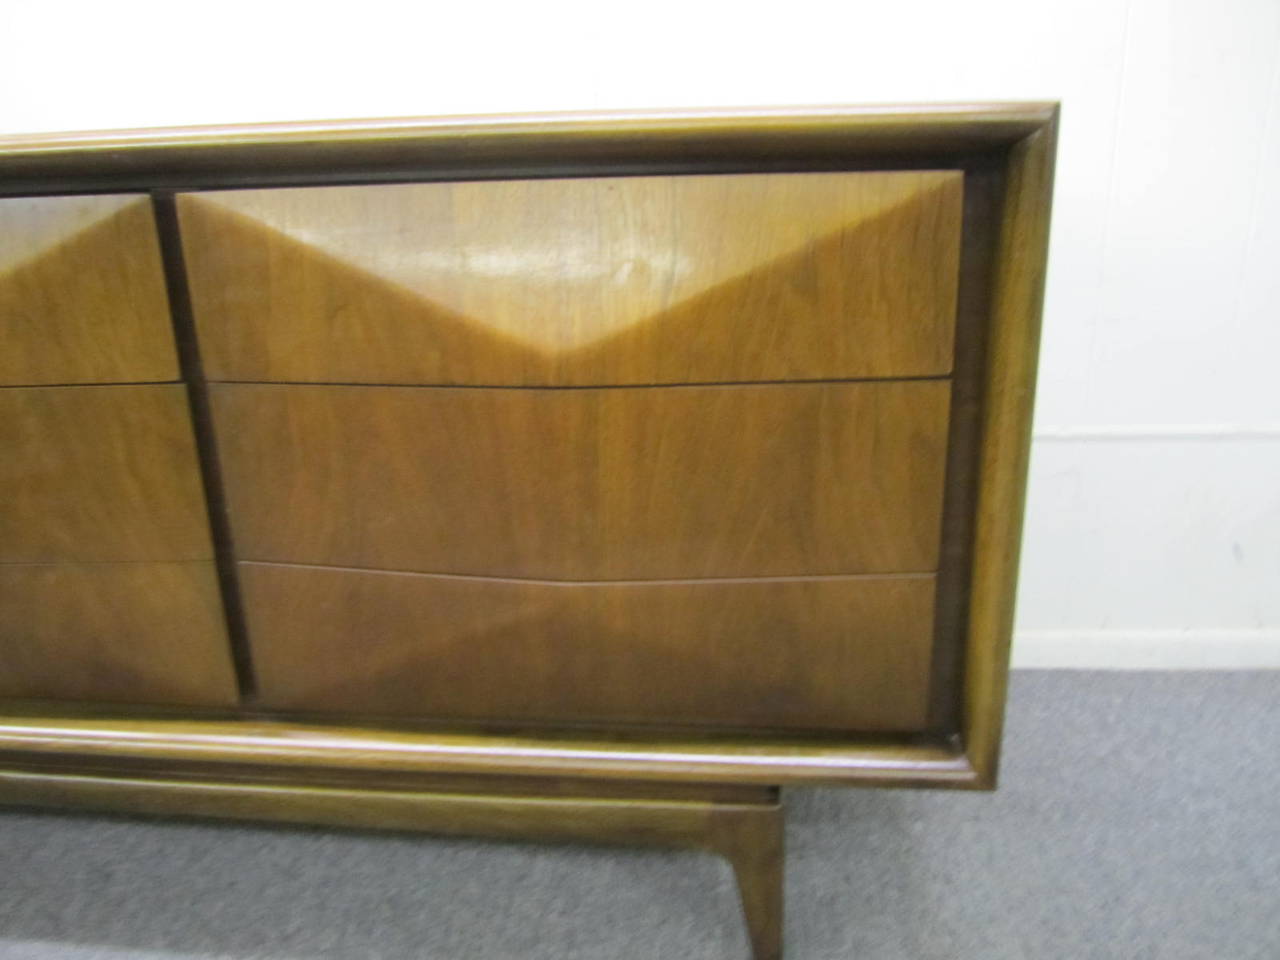 Sleek, Classic, modern, Mid-Century walnut three-dimensional diamond front credenza. The nine drawers provide ample storage functioning perfectly as a bedroom dresser or credenza. This piece is in very nice vintage condition. We do have more than